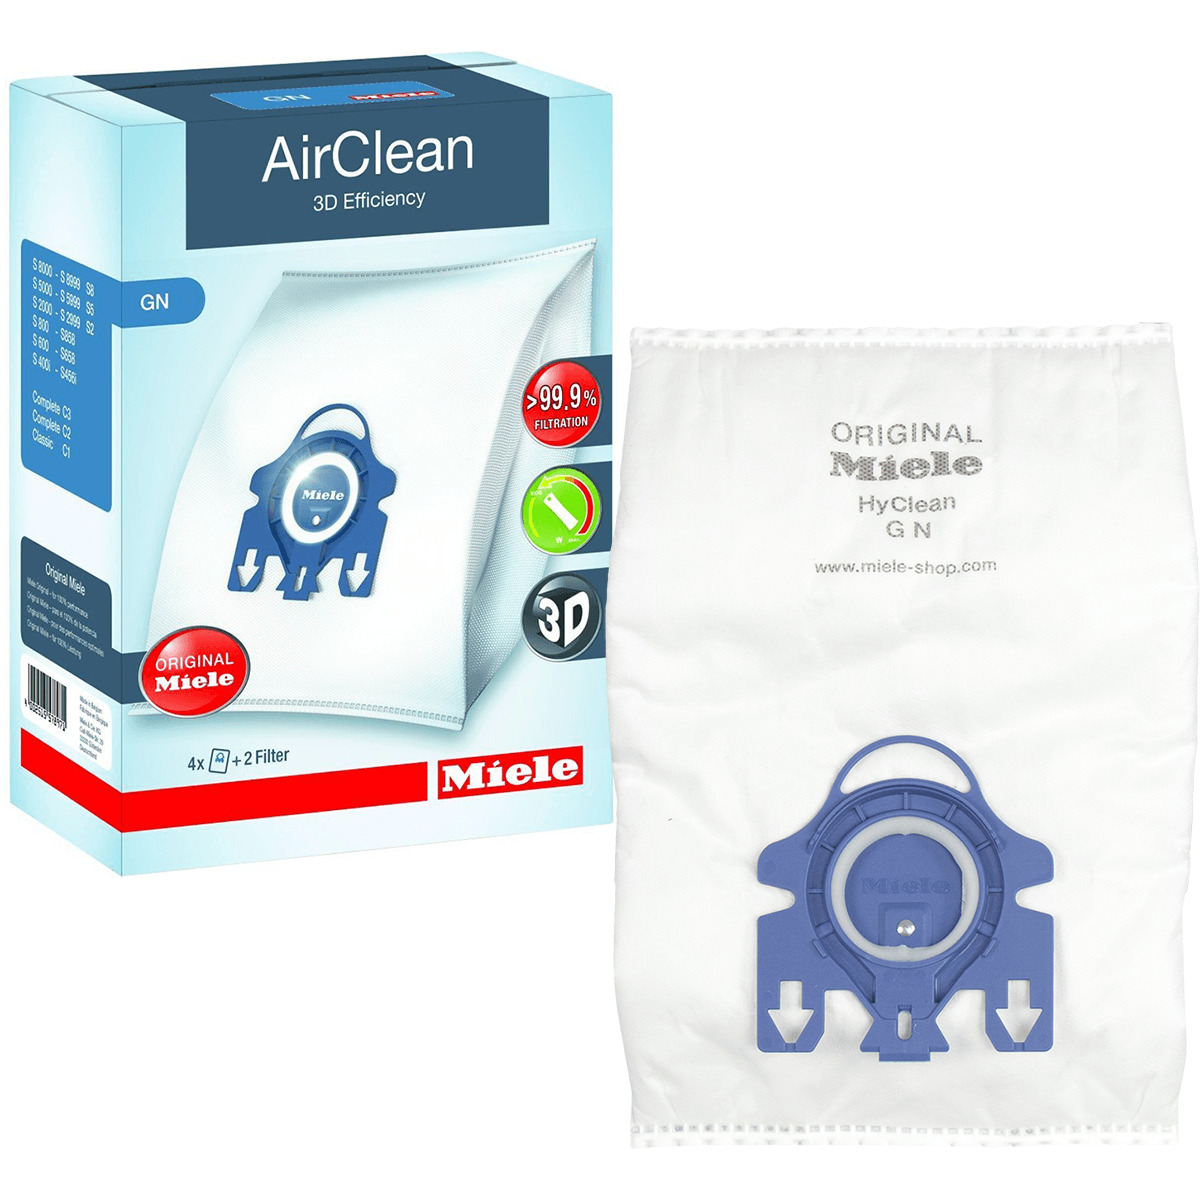 20x GN Vacuum Cleaner Bags for Miele Allervac Sensor 5000 series Automatic TT500 